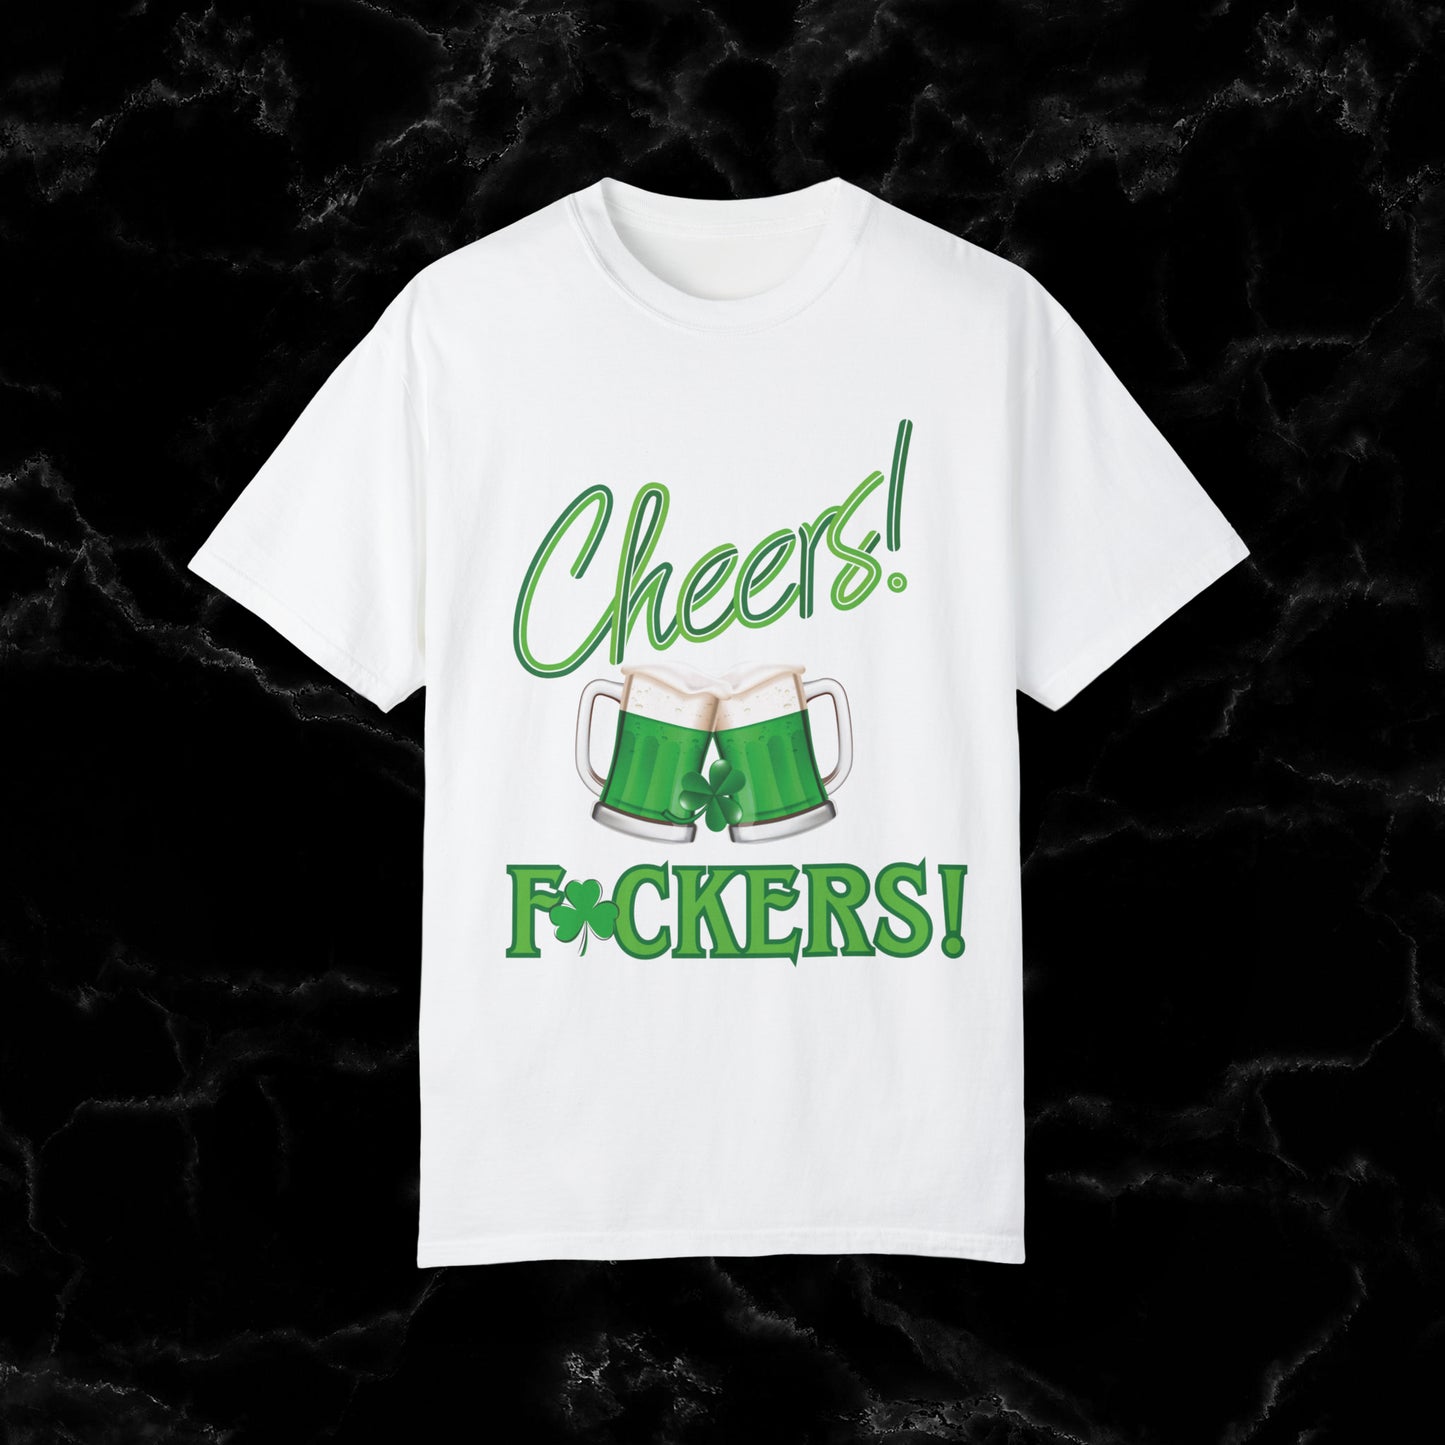 Cheers F**kers Shirt - A Bold Shamrock Statement for Irish Spirits and Good Times T-Shirt White S 